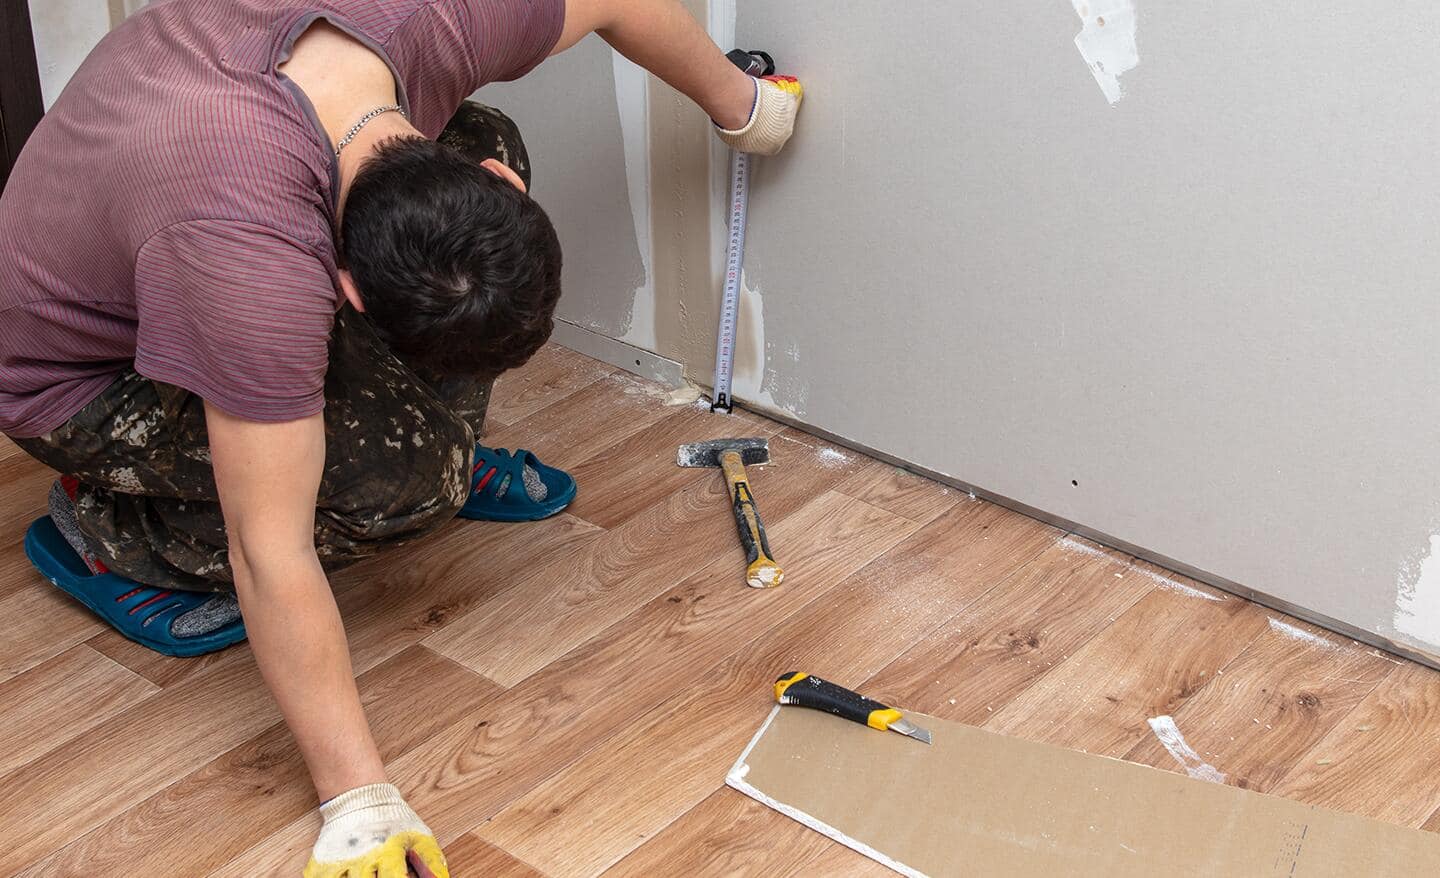 A person is measuring a drywall with a tape measure.